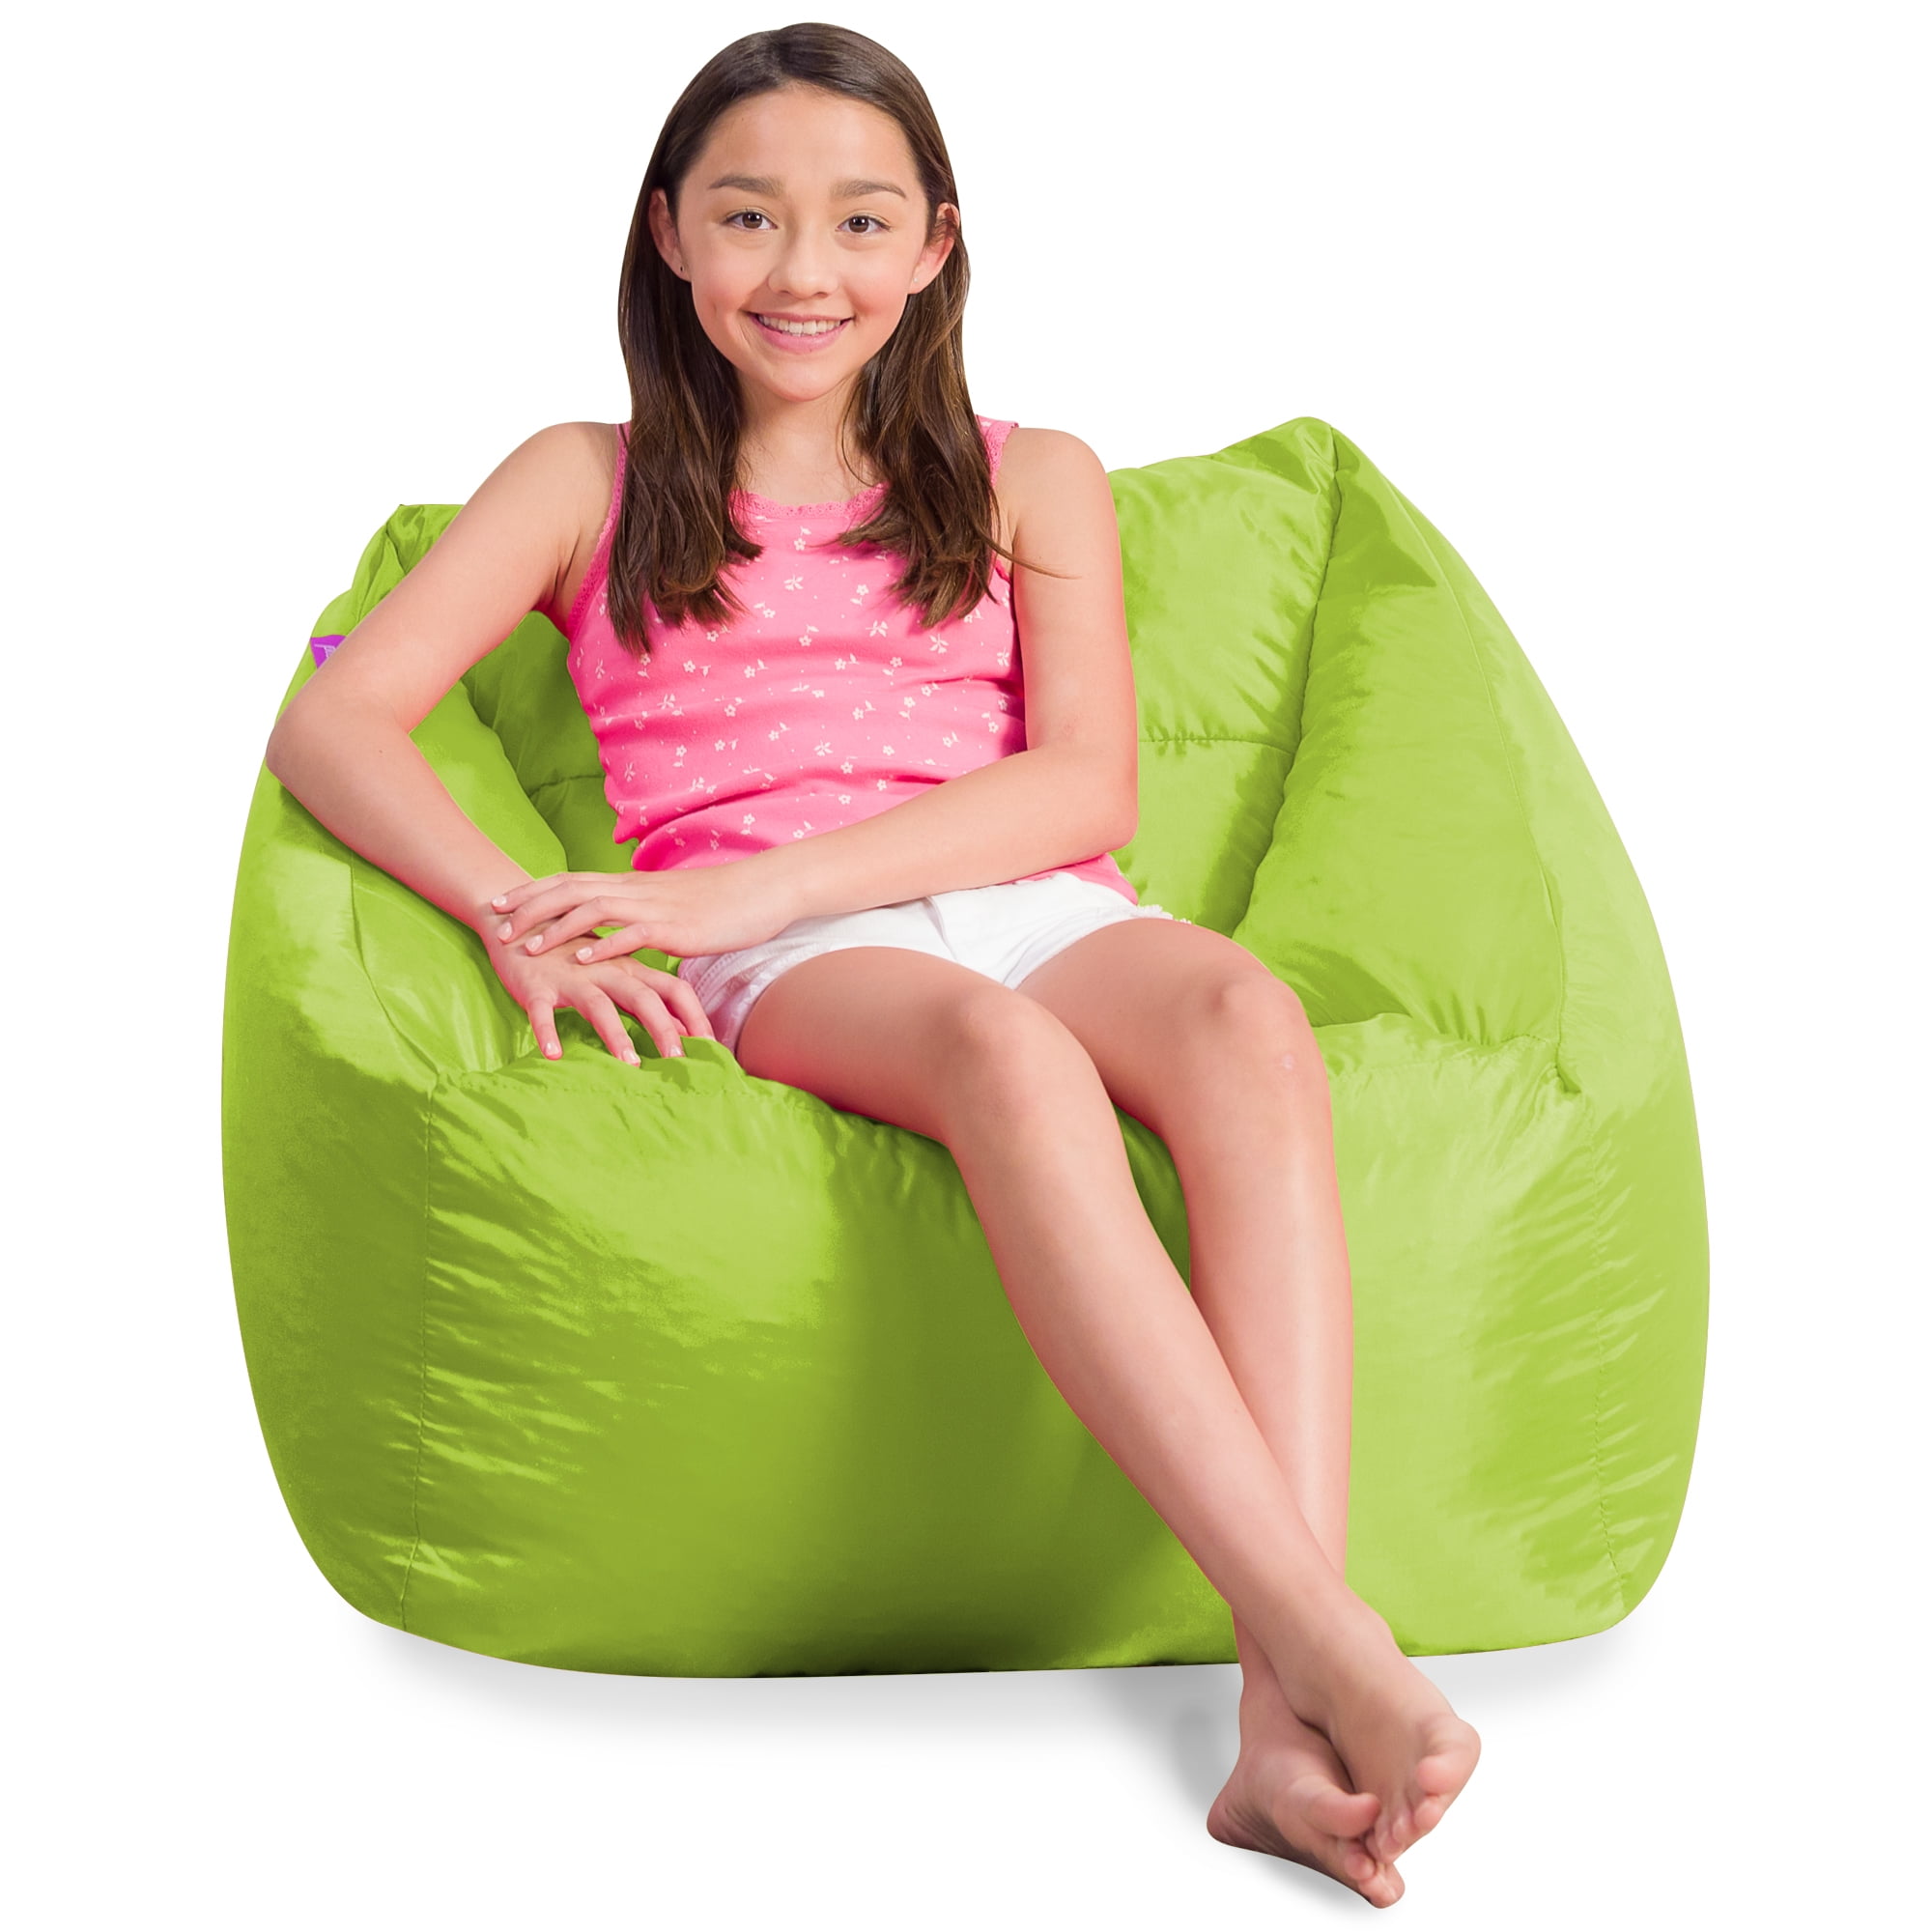 Posh Creations 100in Round Classic Kids Childrens Bean Bag Big Chair for Boys and Girls Large Black